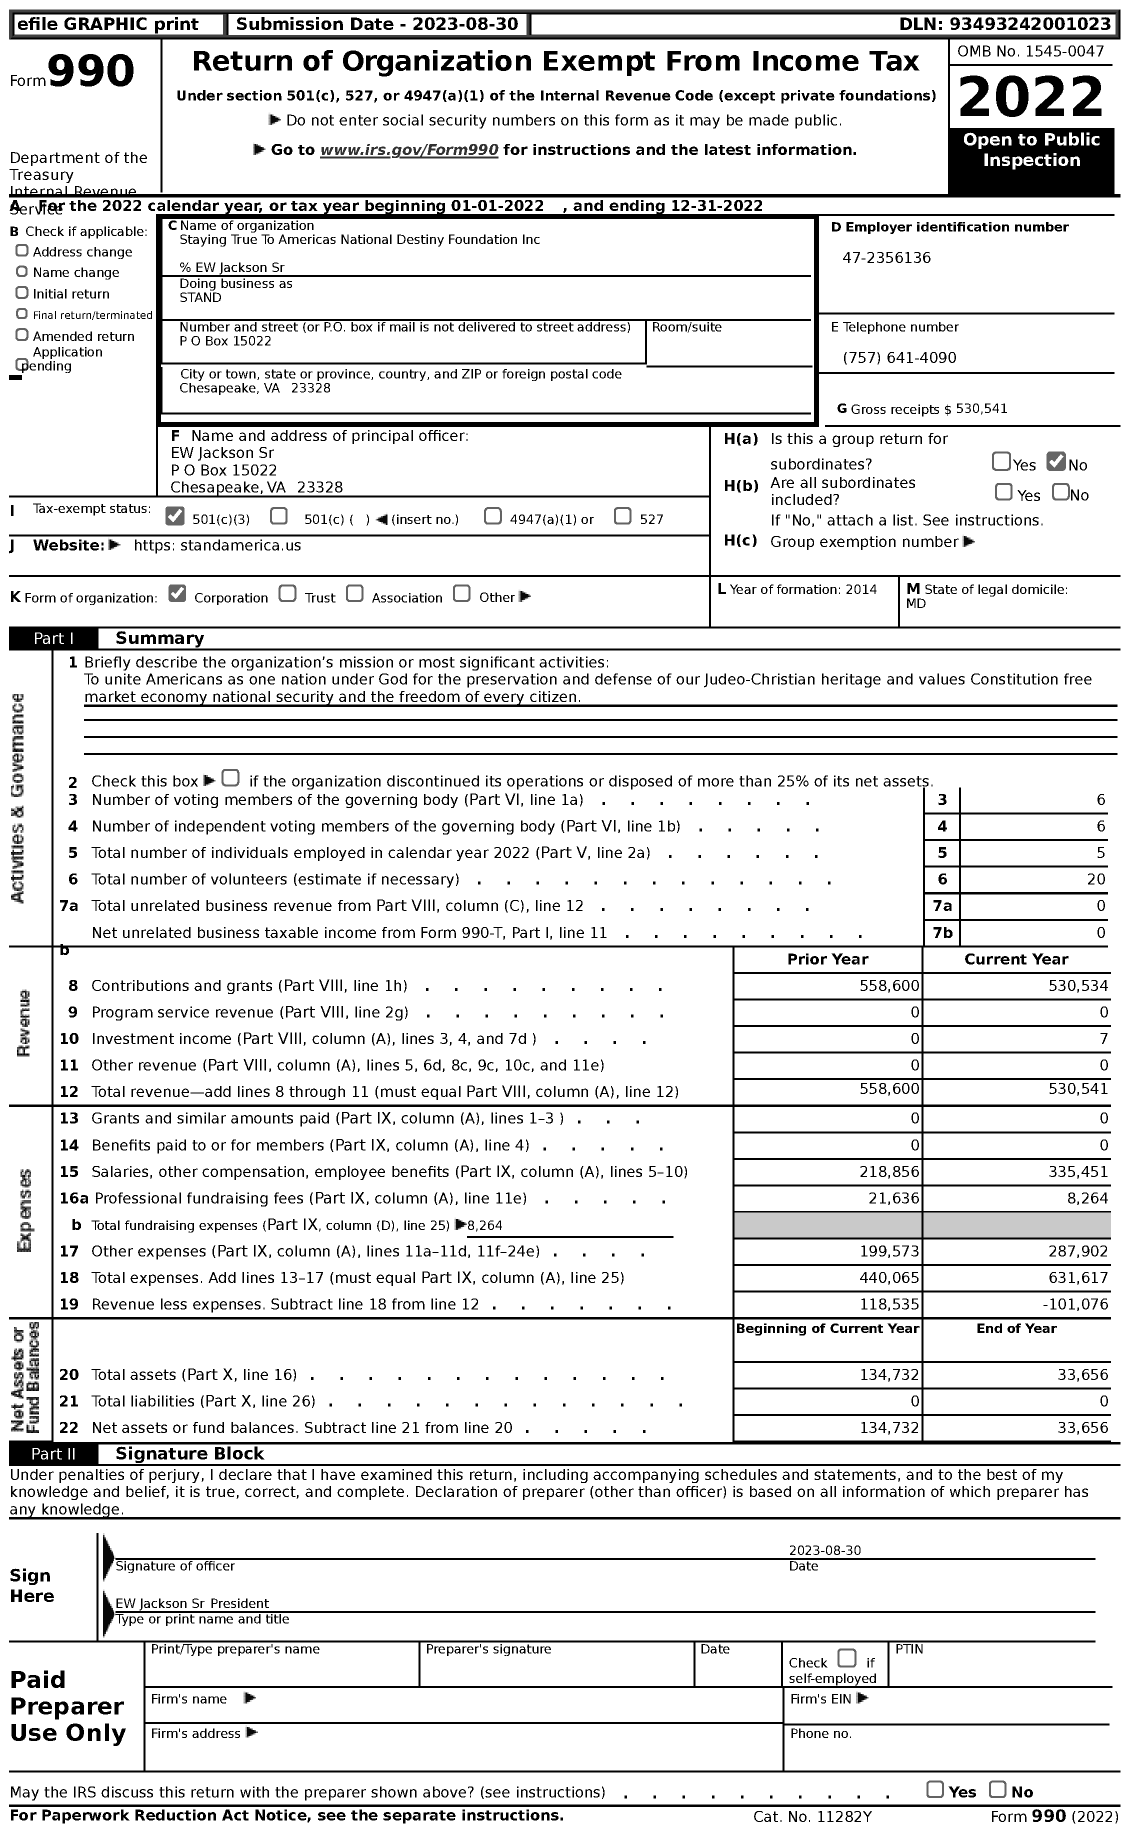 Image of first page of 2022 Form 990 for Stand / Staying True To Americas National Destiny Foundation Inc